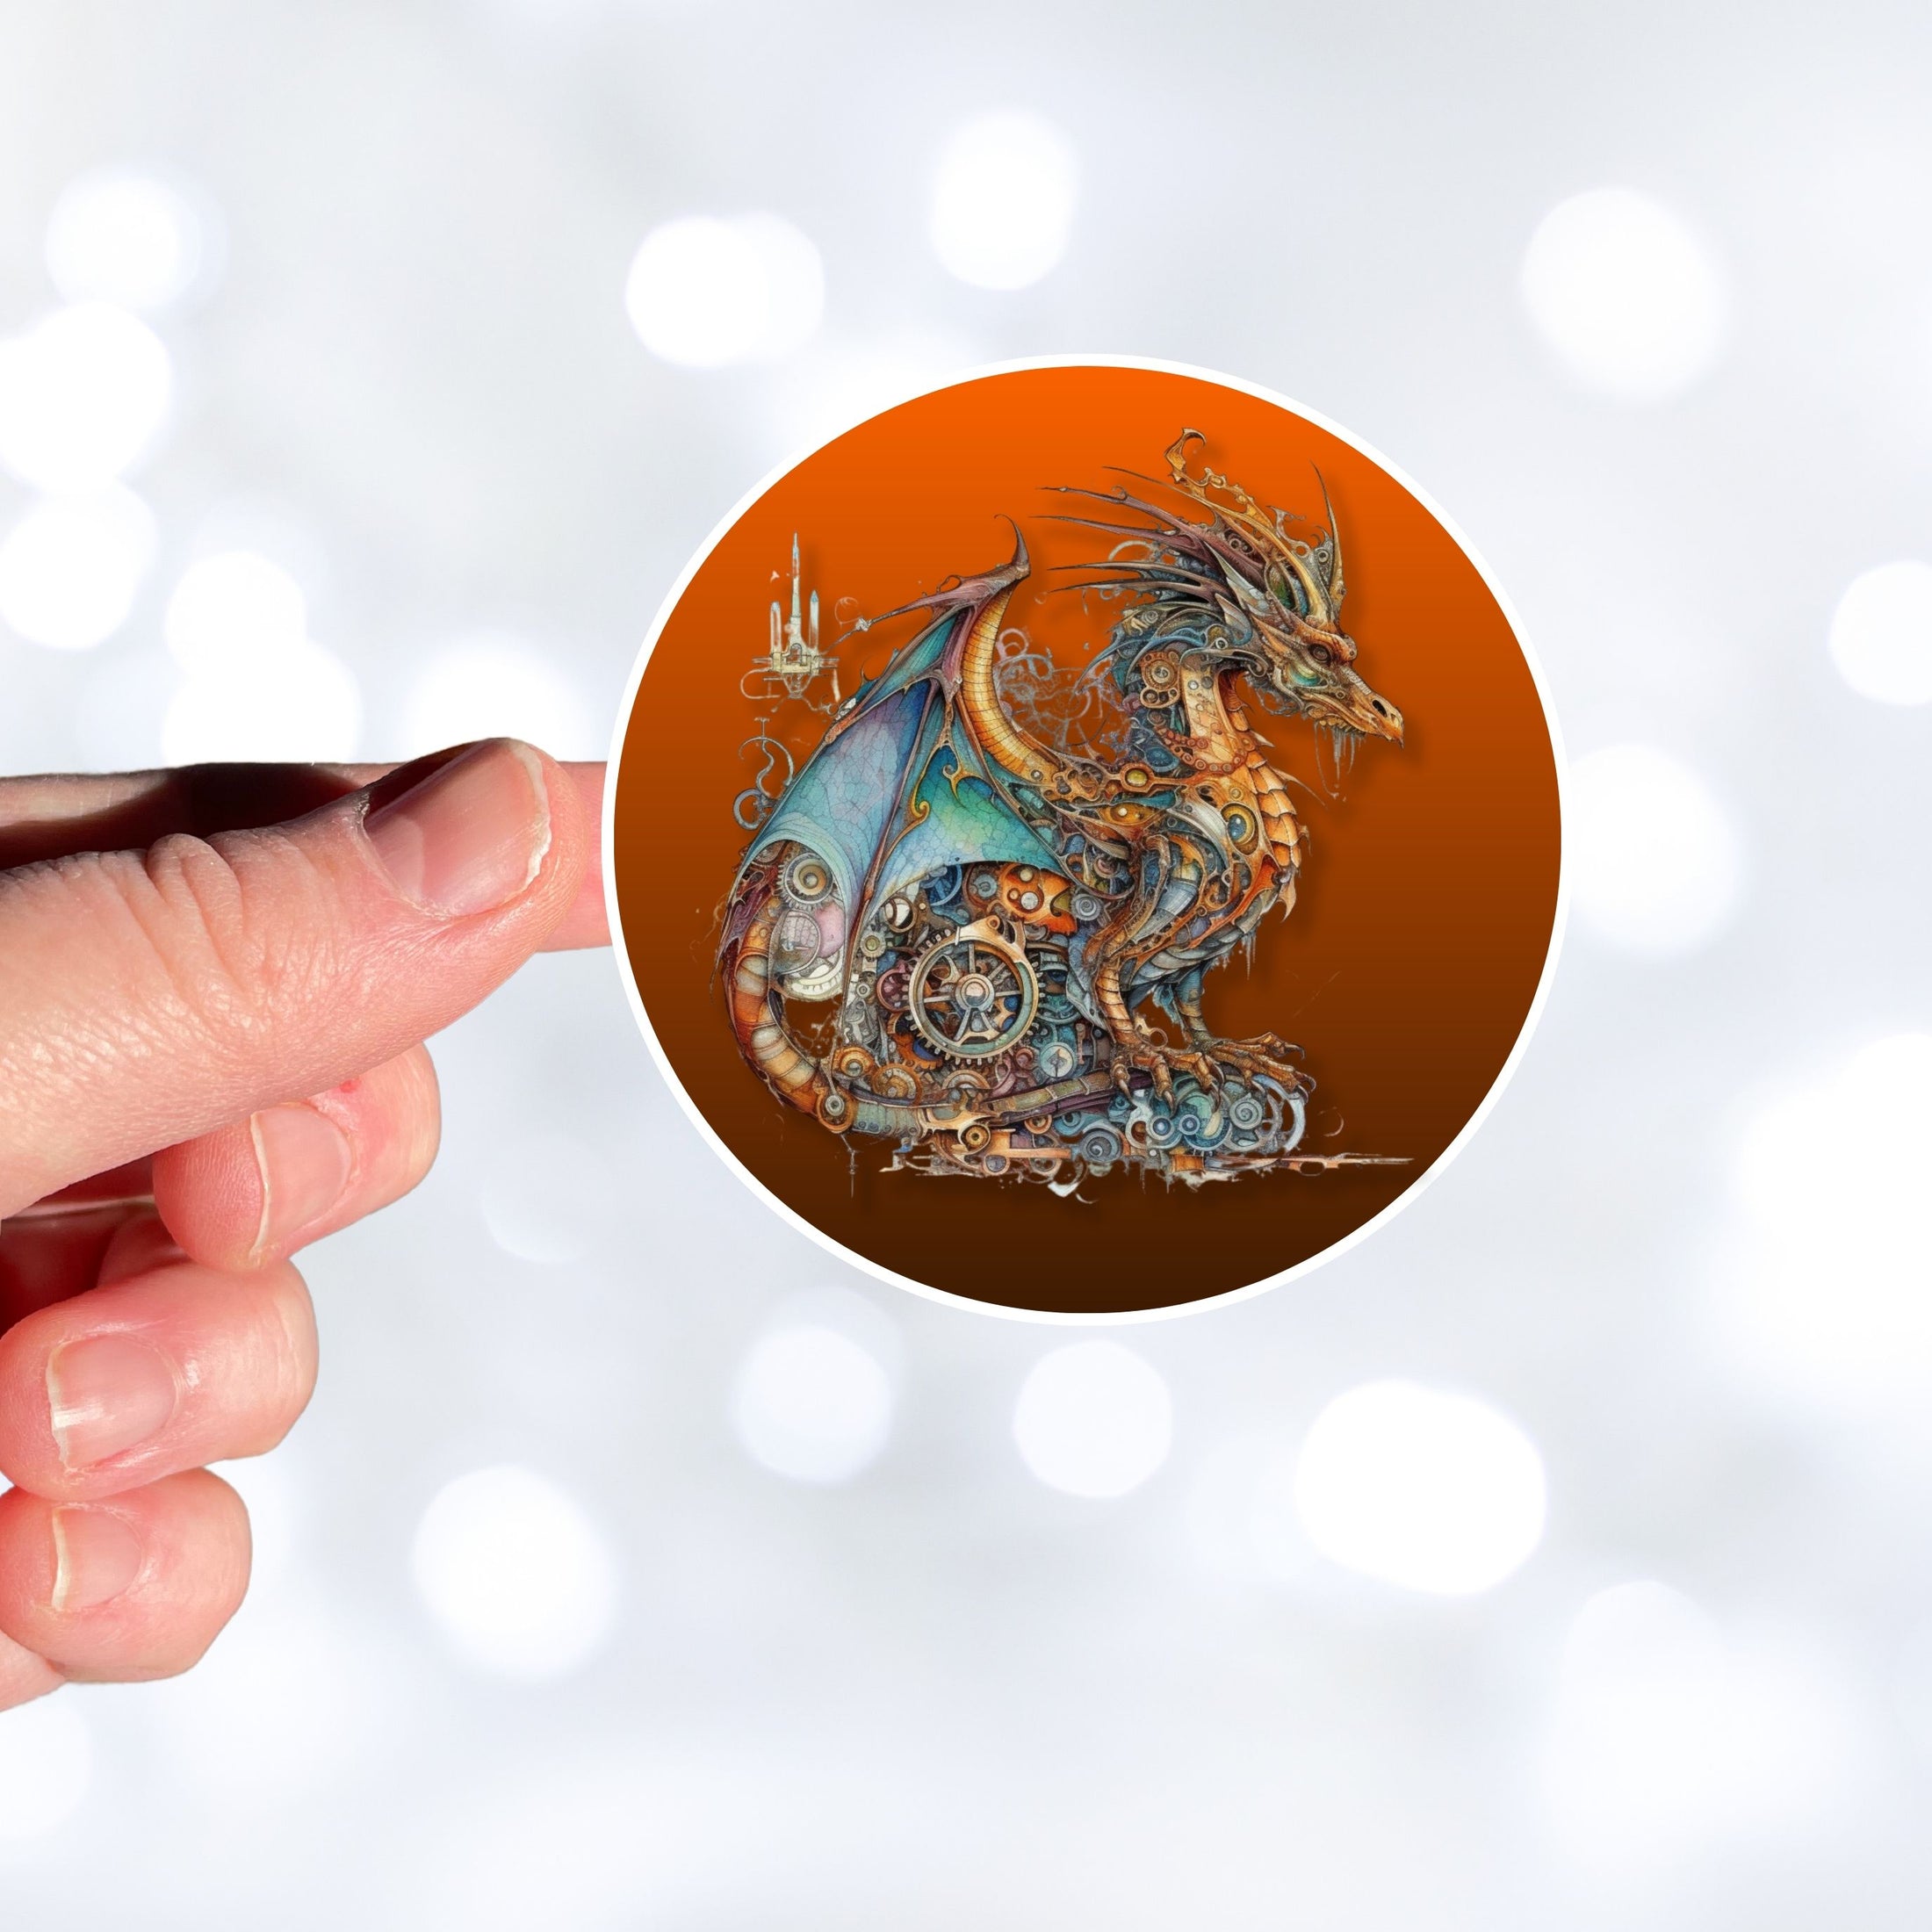 This image shows a hand holding the steampunk dragon copper background sticker.